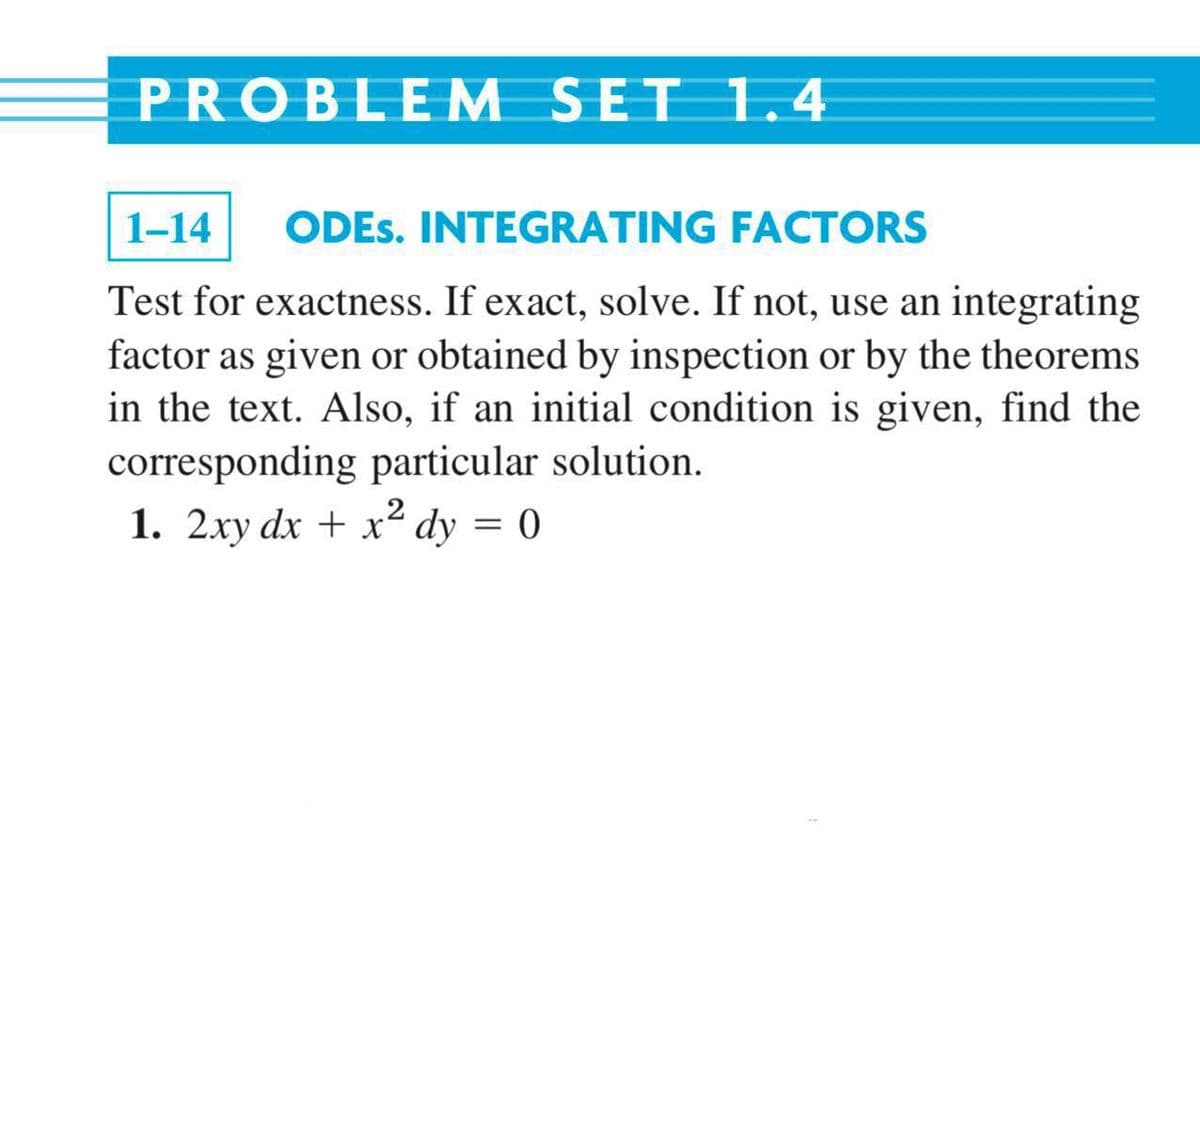 PROBLEM SET 1.4
1-14
ODES. INTEGRATING FACTORS
Test for exactness. If exact, solve. If not, use an integrating
factor as given or obtained by inspection or by the theorems
in the text. Also, if an initial condition is given, find the
corresponding particular solution.
1. 2xy dx + x² dy = 0